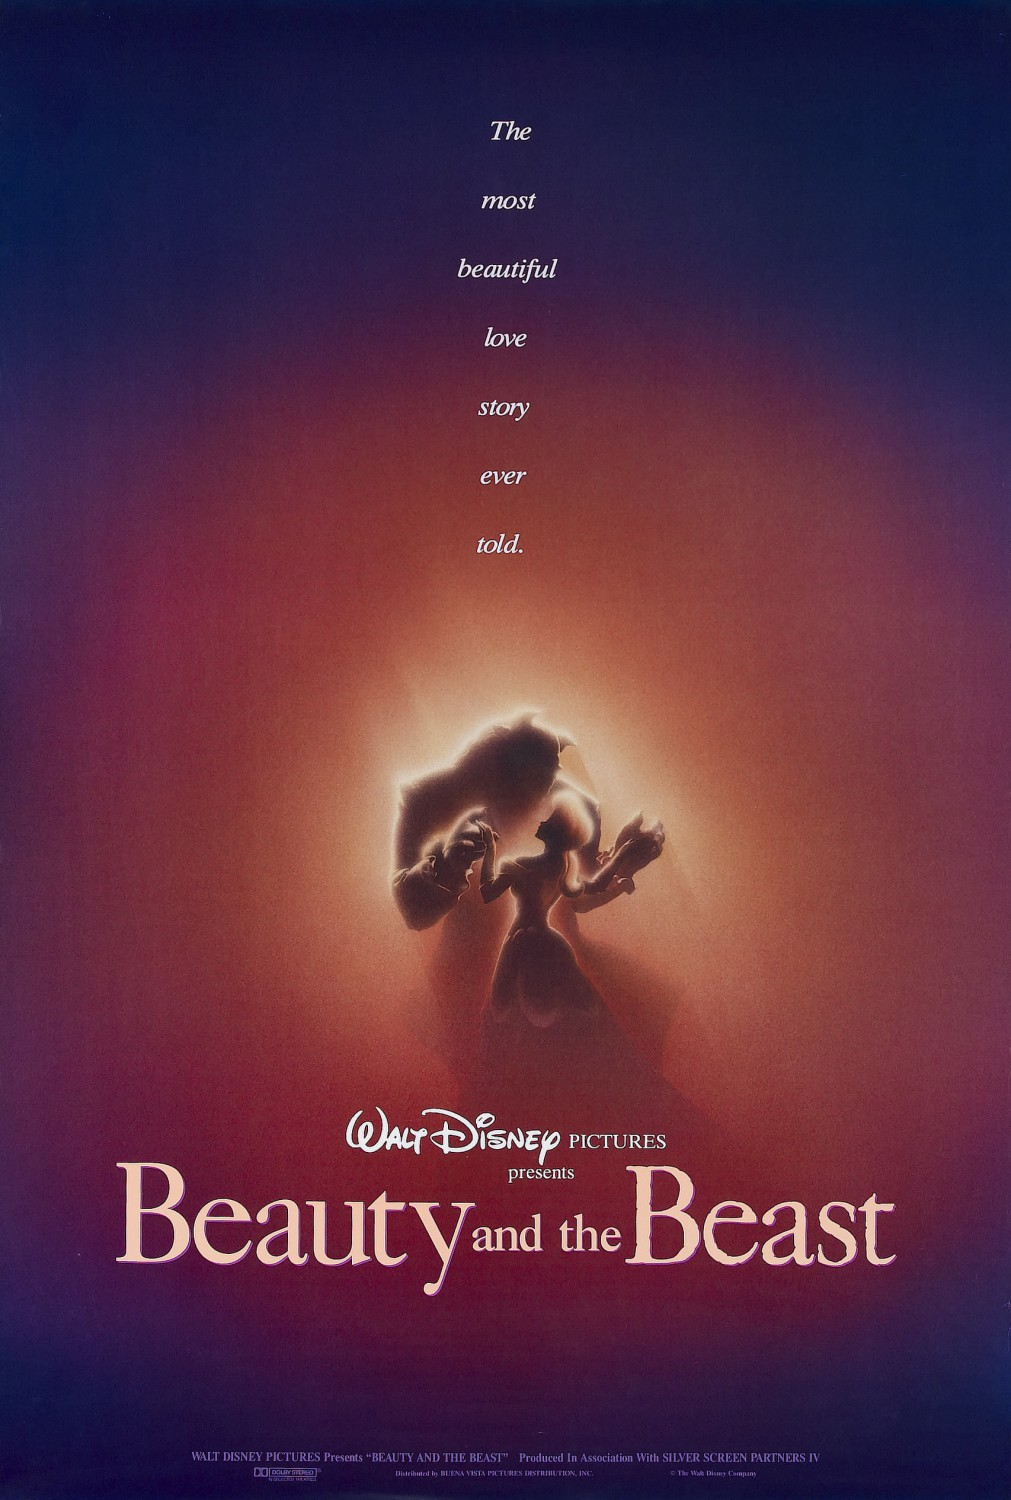 Best Christmas animated movies - Beauty and the Beast